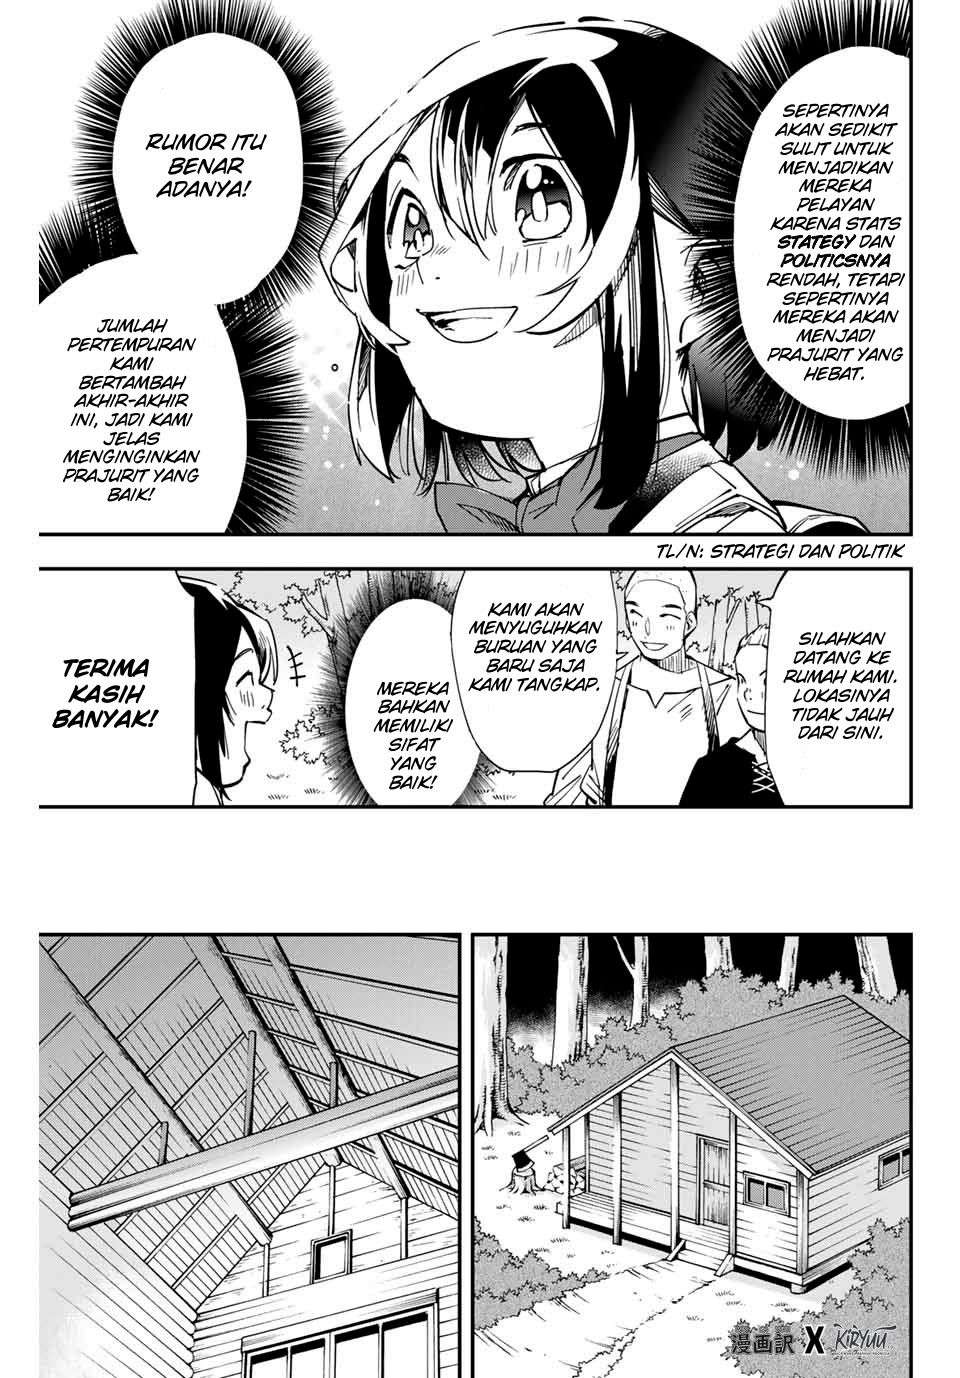 Reincarnated as an Aristocrat with an Appraisal Chapter 12 Bahasa Indonesia